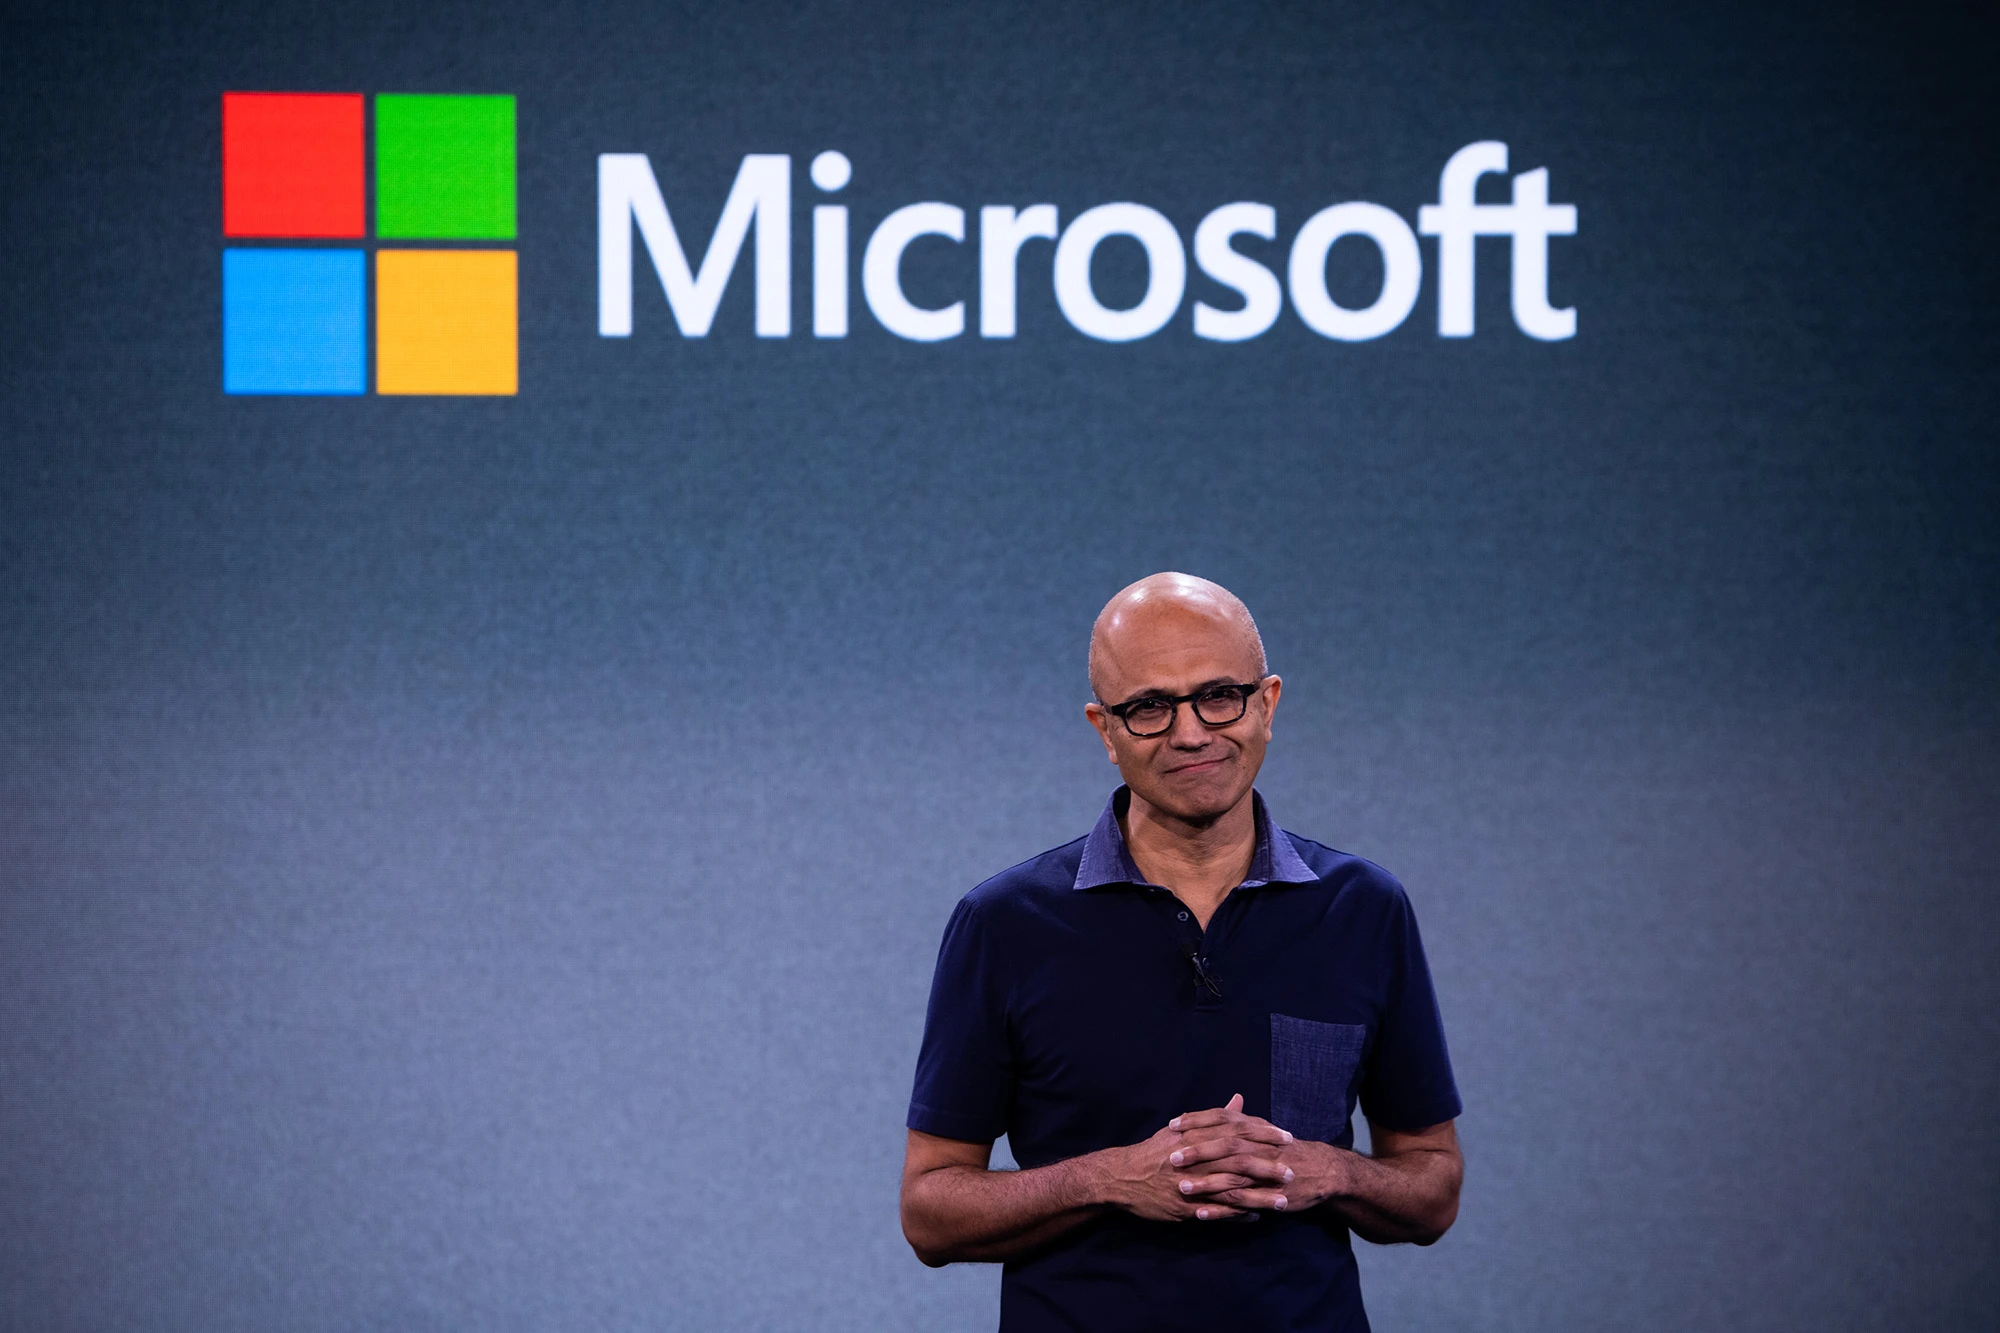 After recent layoffs, Microsoft aims to equip 2 million AI trainees in India by 2025